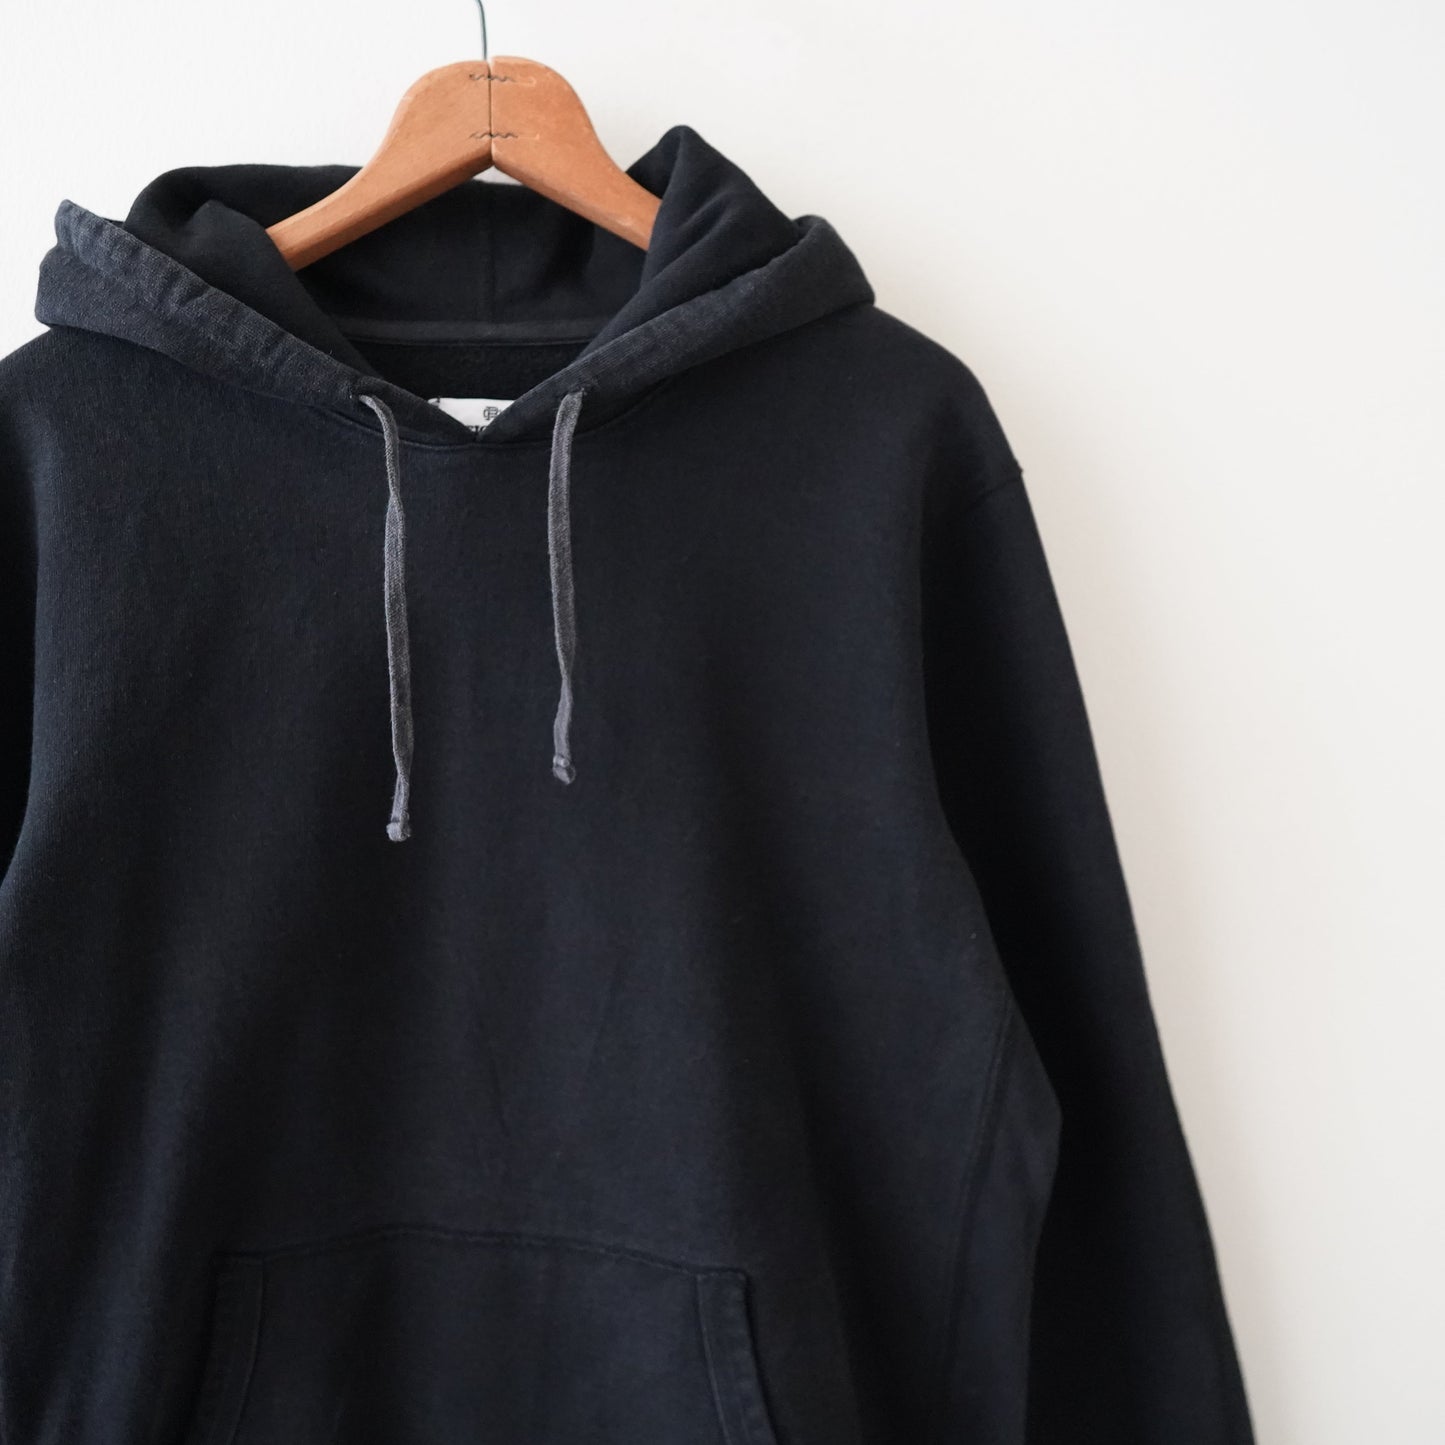 REIGNING CHAMP hoodie